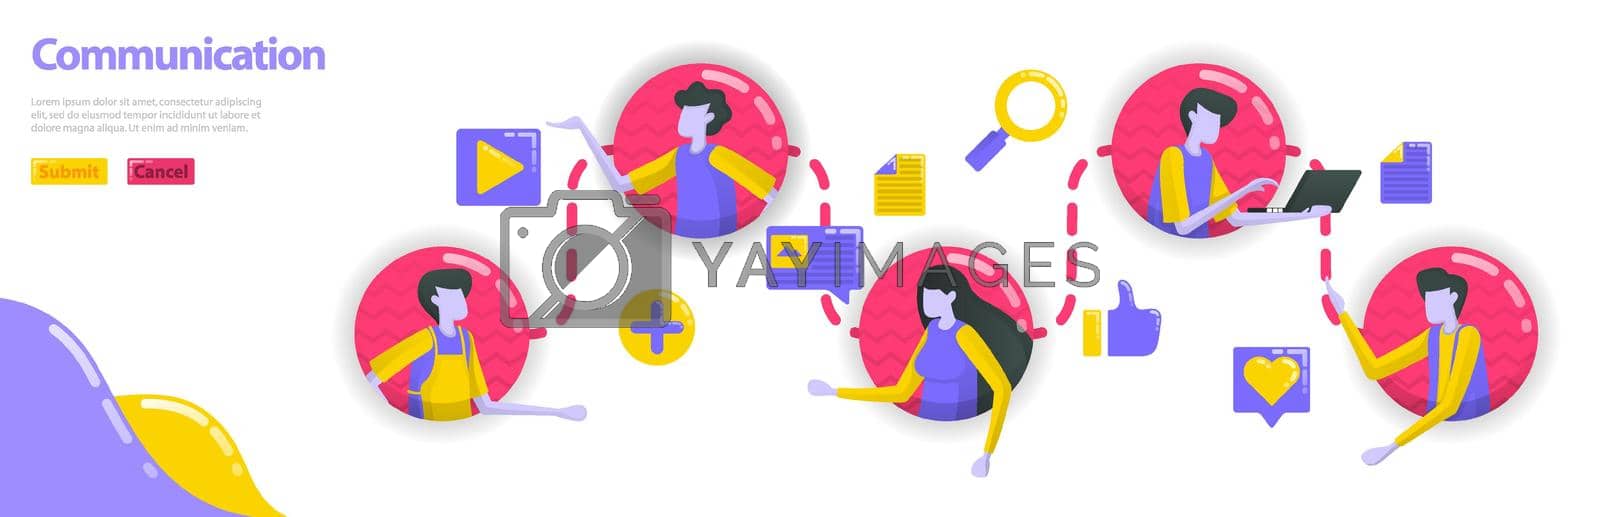 Royalty free image of Illustration of communication. people are connected to each other in communication and community line. social media connects people. Flat vector concept for Landing page, website, mobile, apps, banner by yayimage